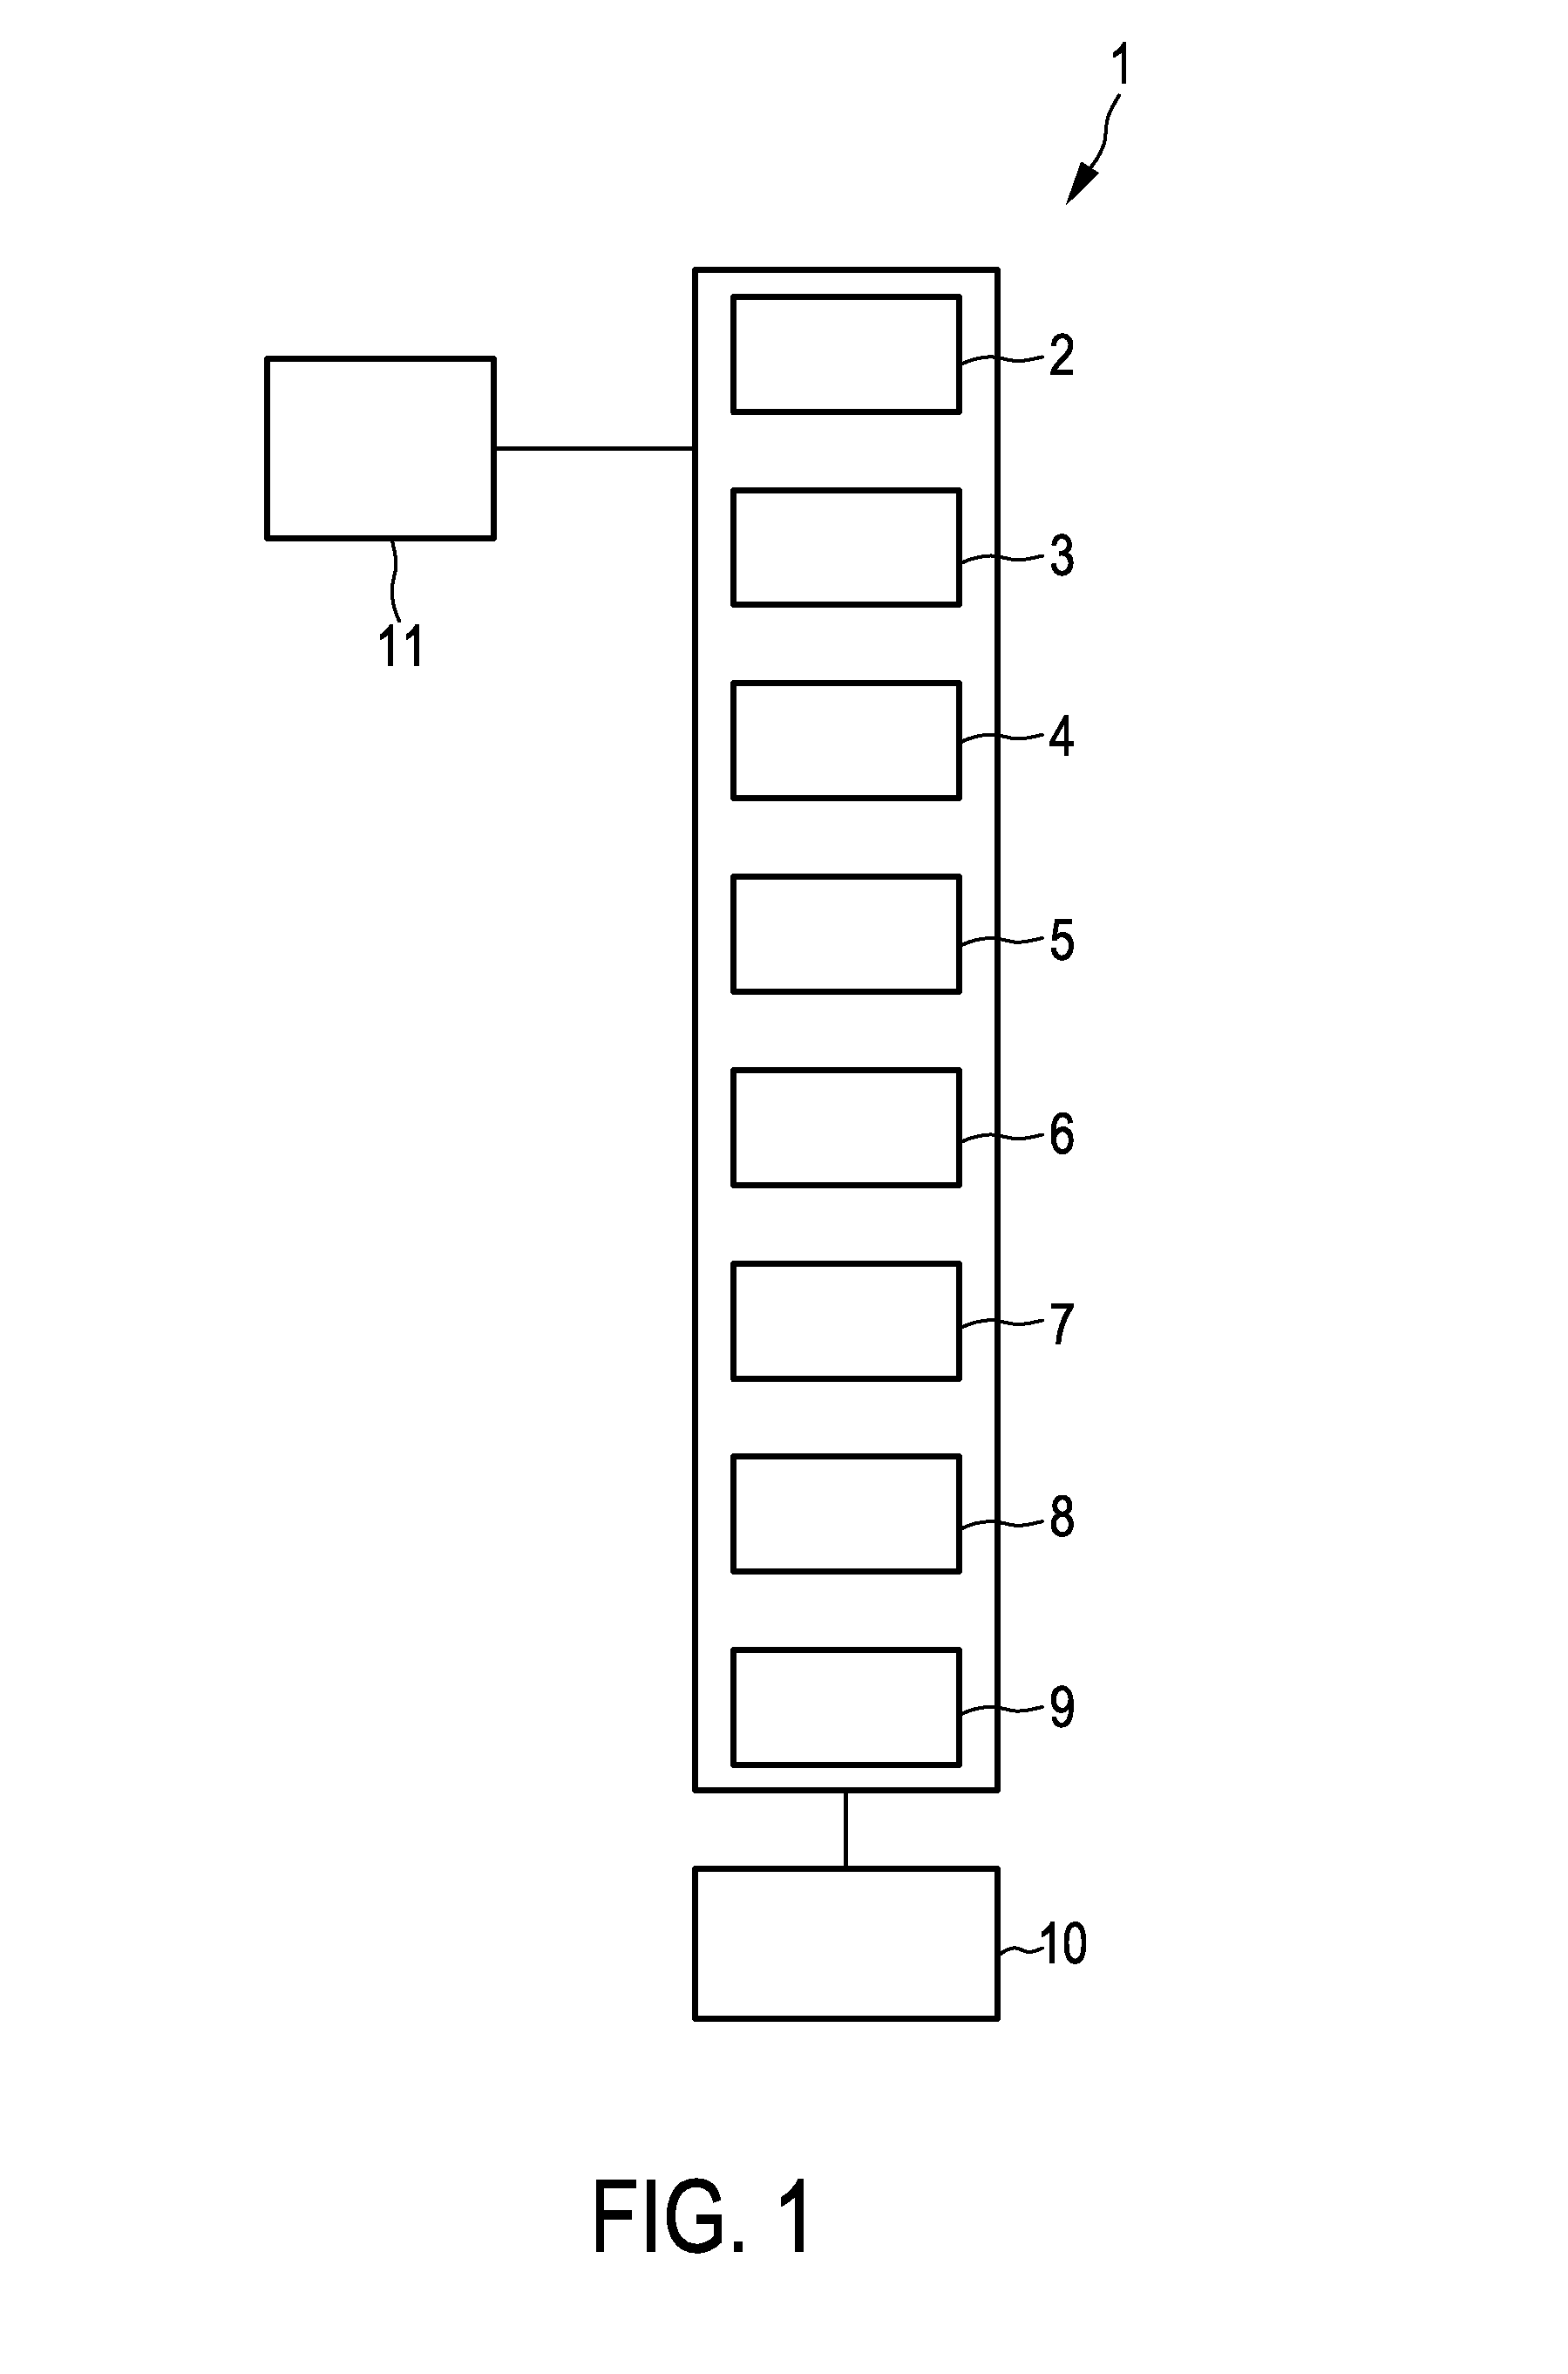 Image processing device for finding corresponding regions in two image data sets of an object